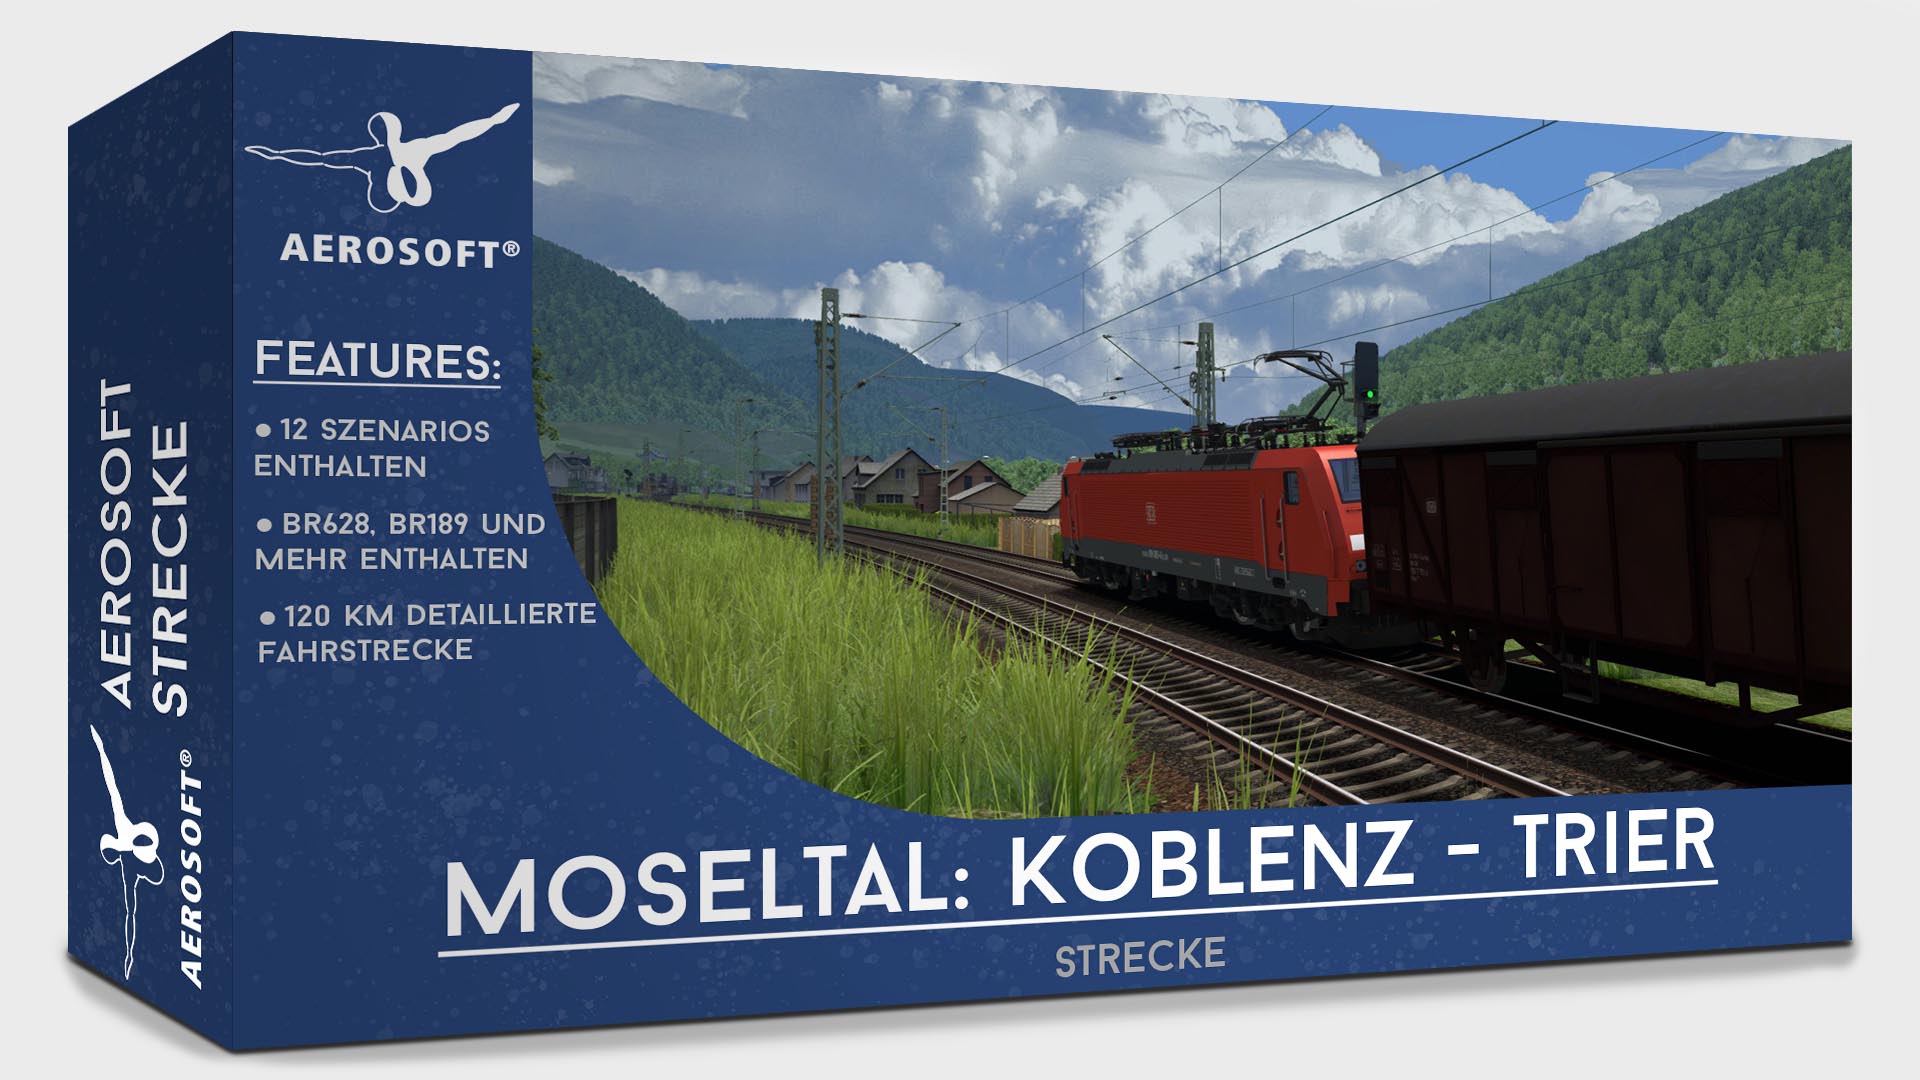 Along the Moselle Valley: Koblenz - Trier